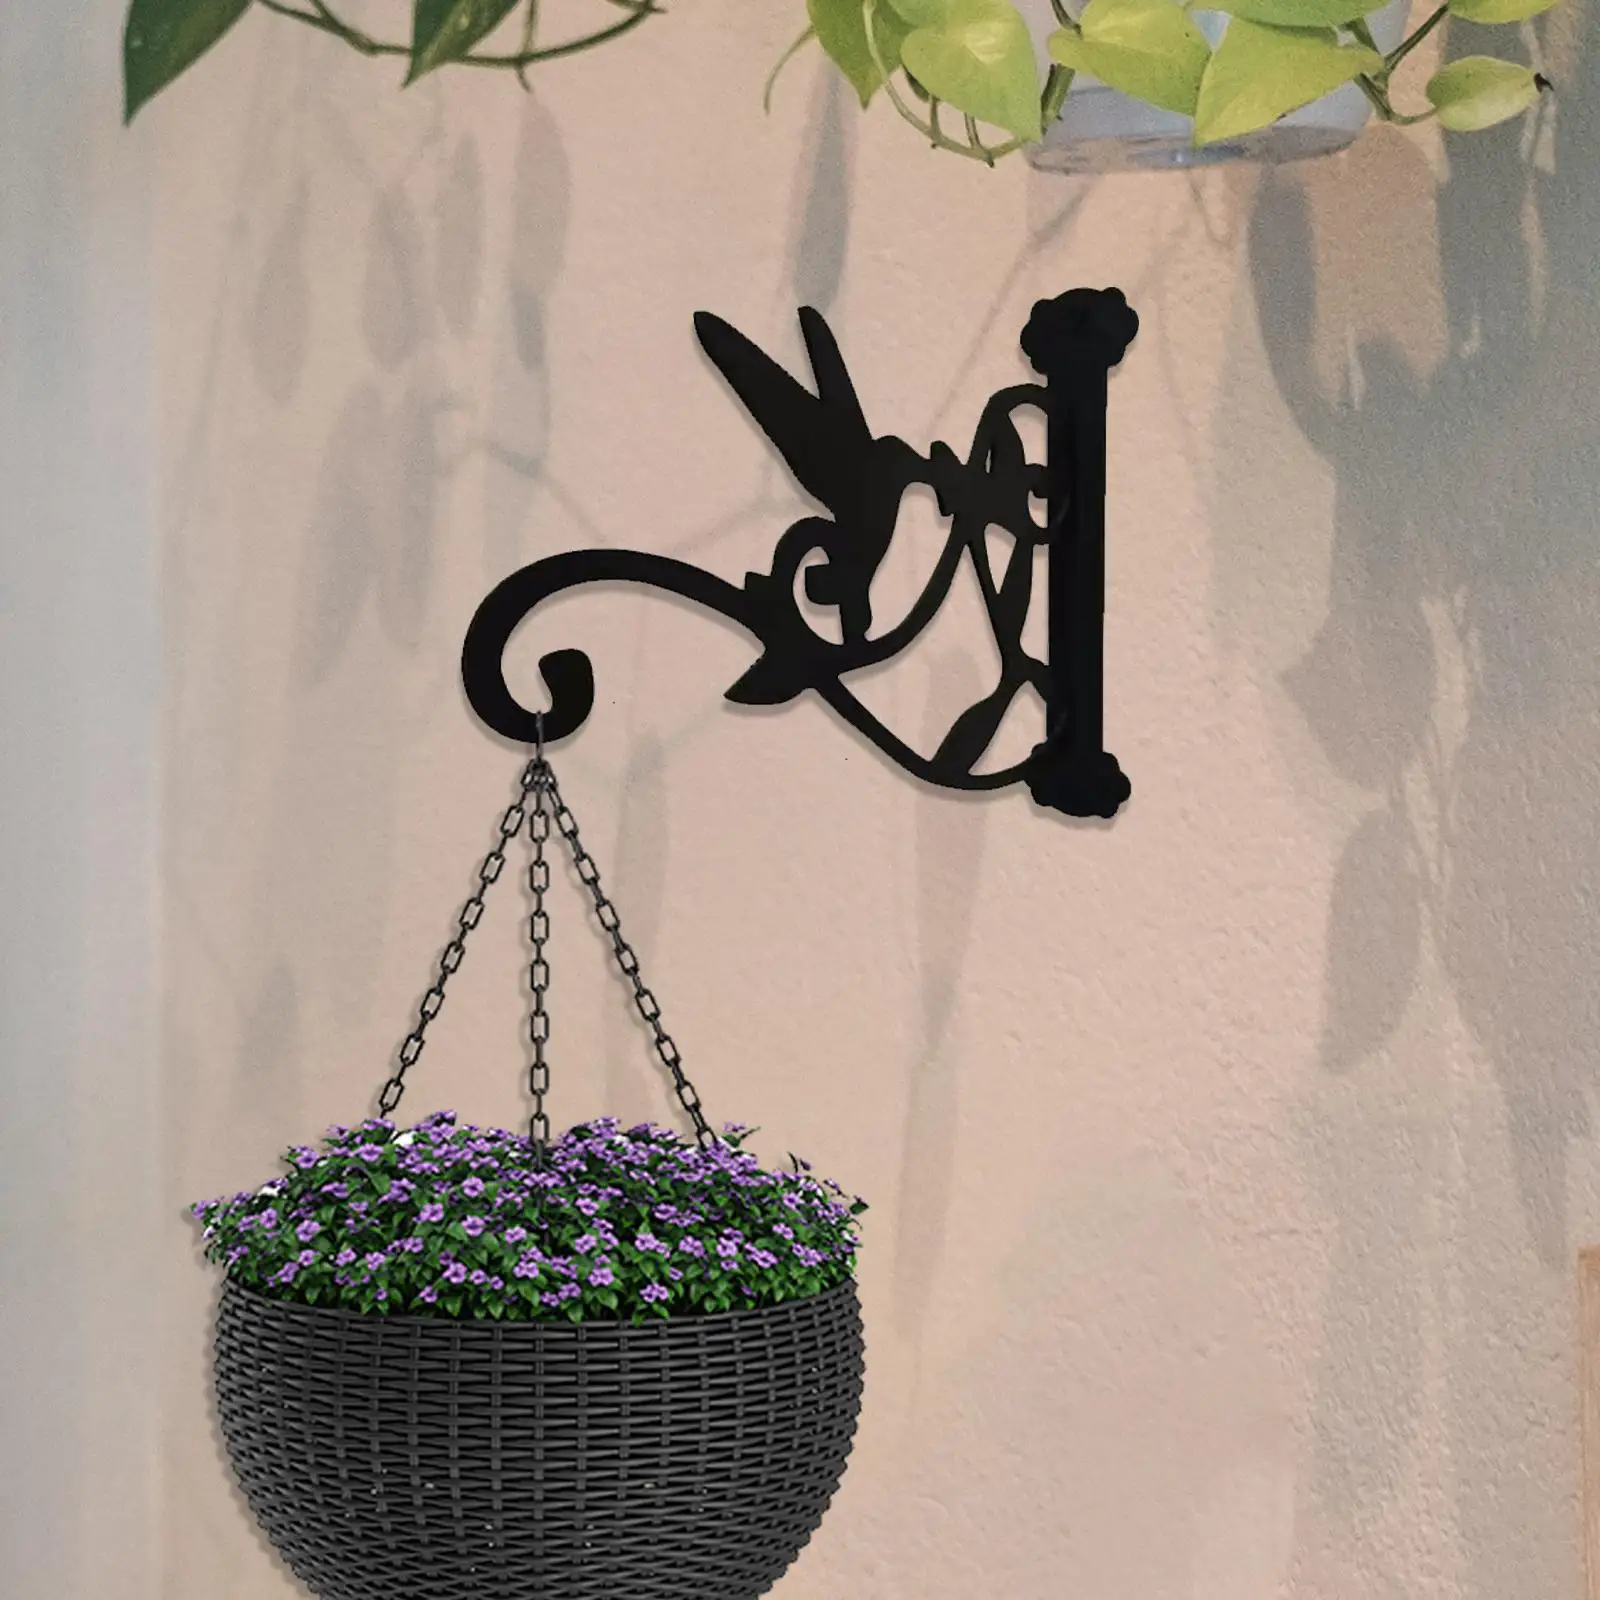 Heavy Duty Hanging Planter Brackets Wall Mount Strong Bearing Iron Planter Hangers for Fence Window Balcony Lanterns Indoor